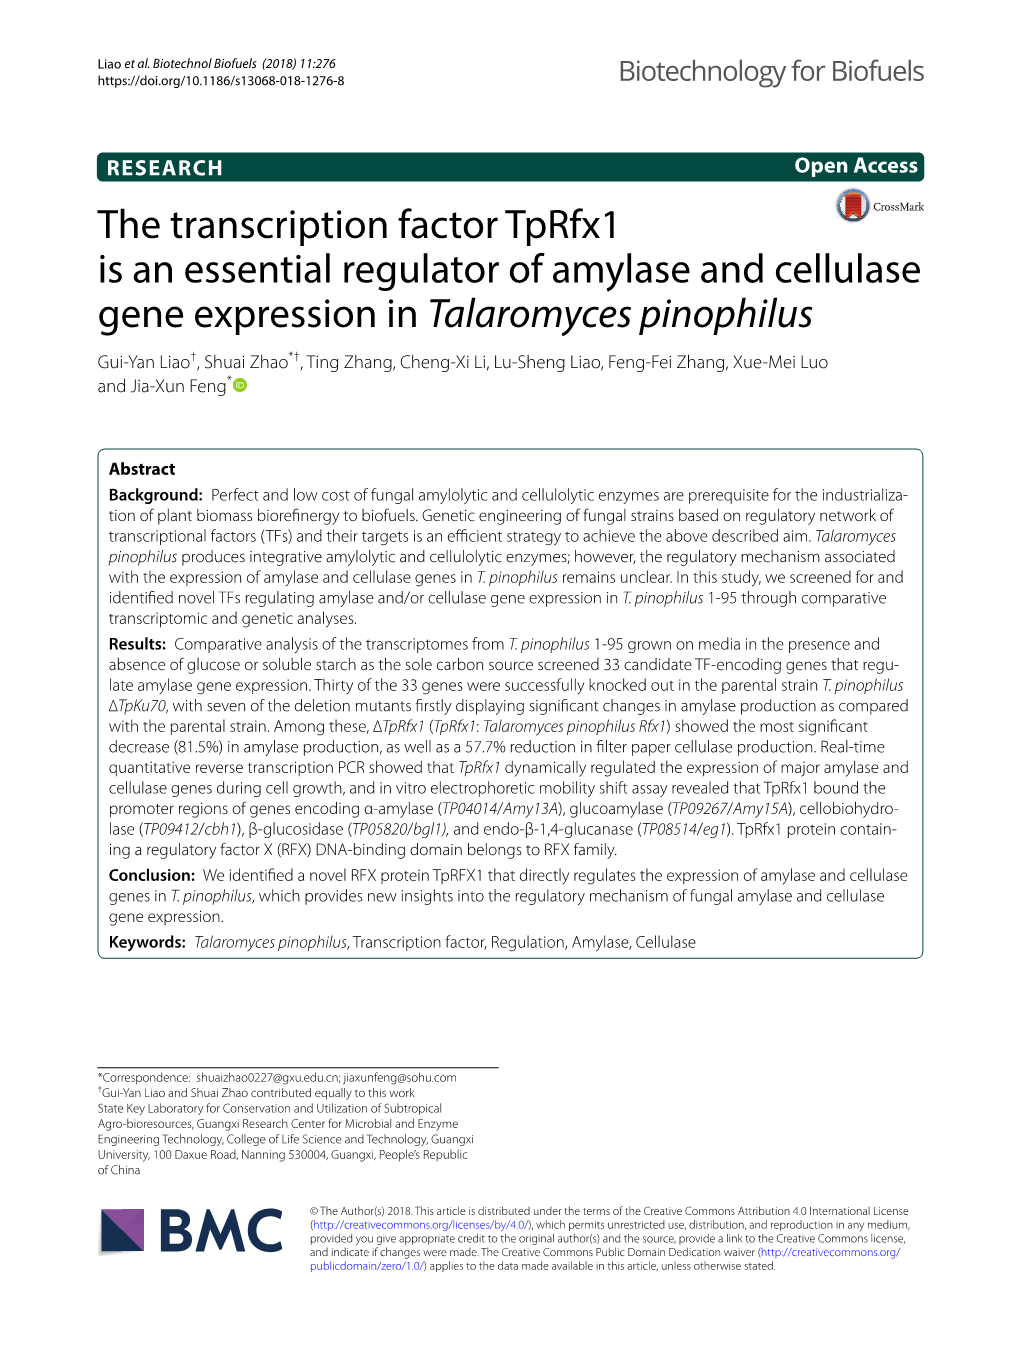 The Transcription Factor Tprfx1 Is an Essential Regulator of Amylase And